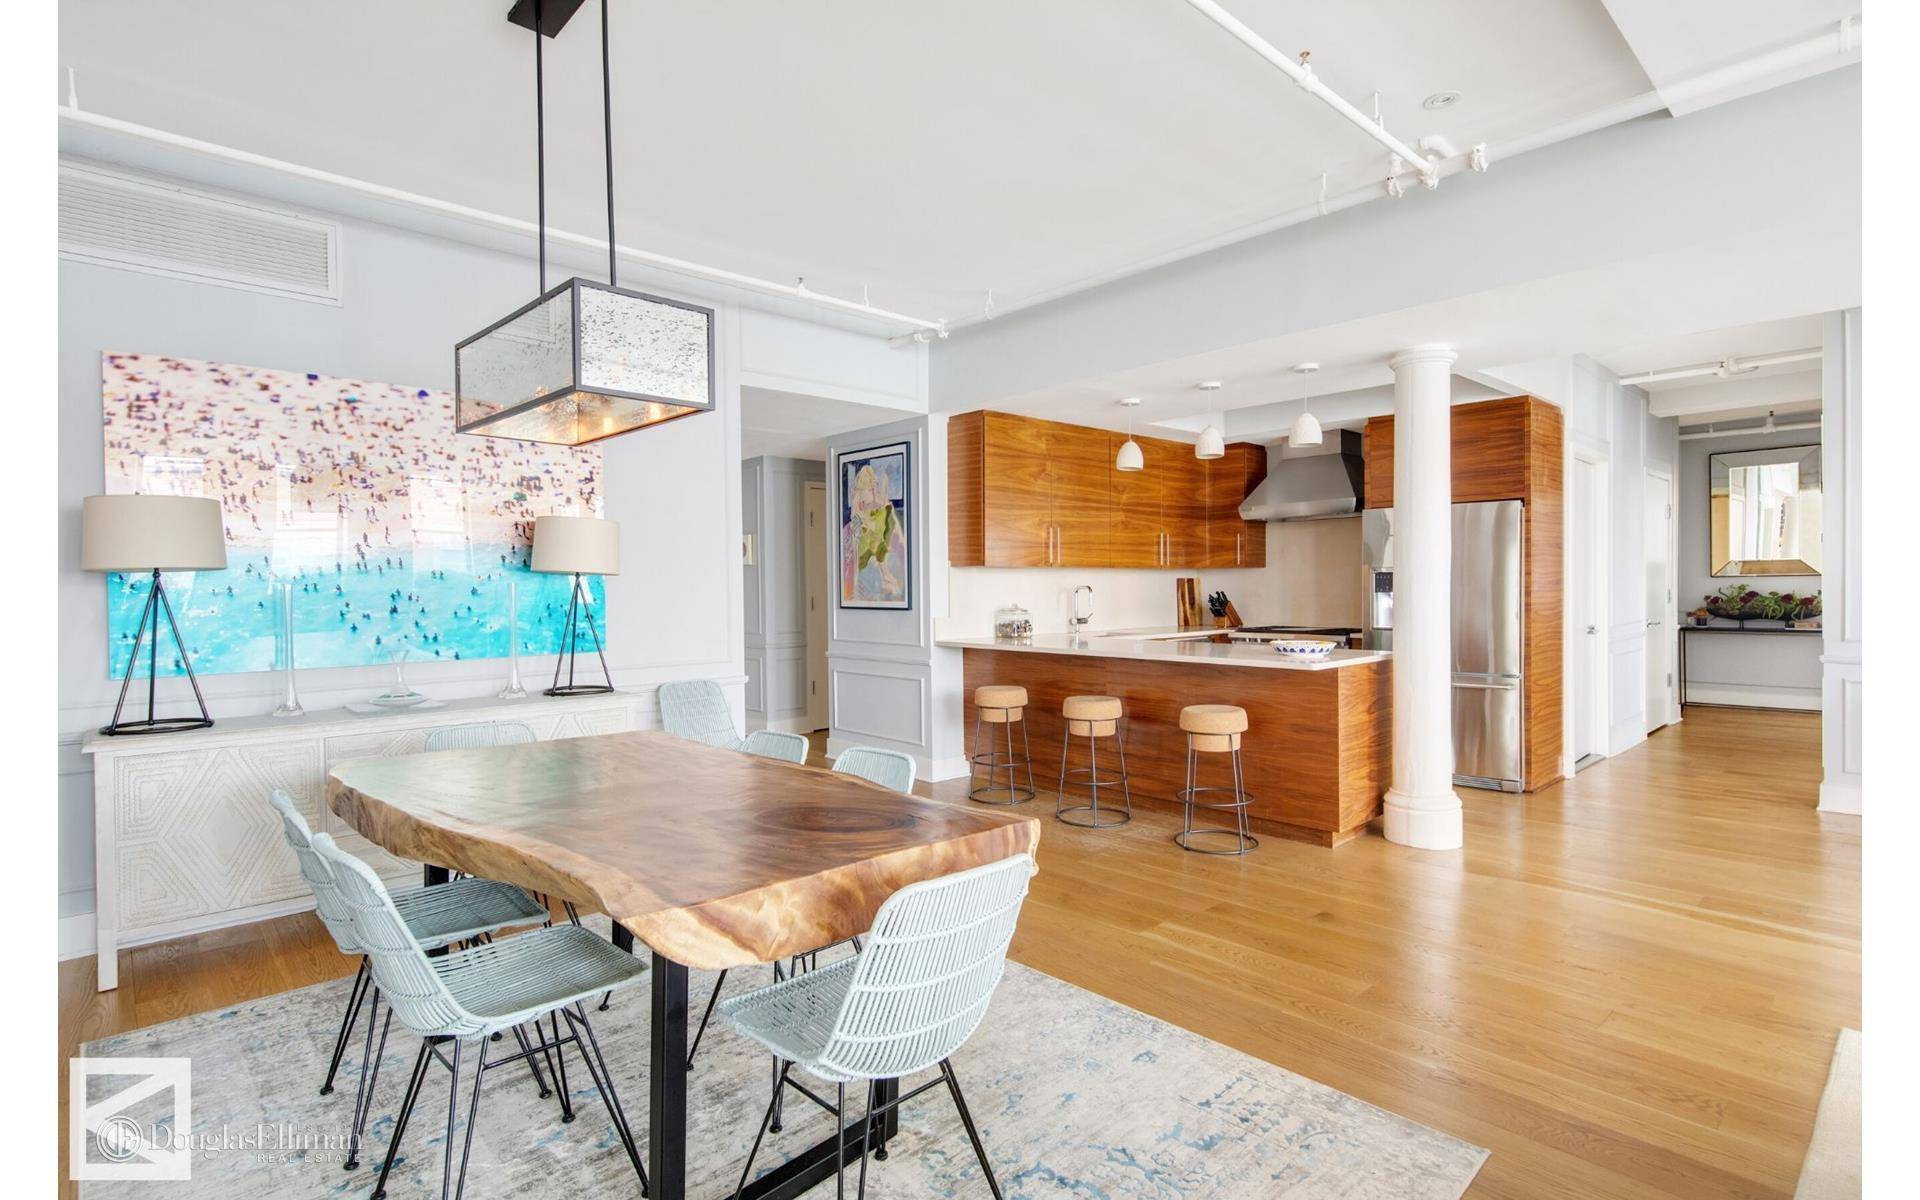 Situated on the coveted Mulberry Street in the heart of Nolita this unrivaled four bedroom, 3.